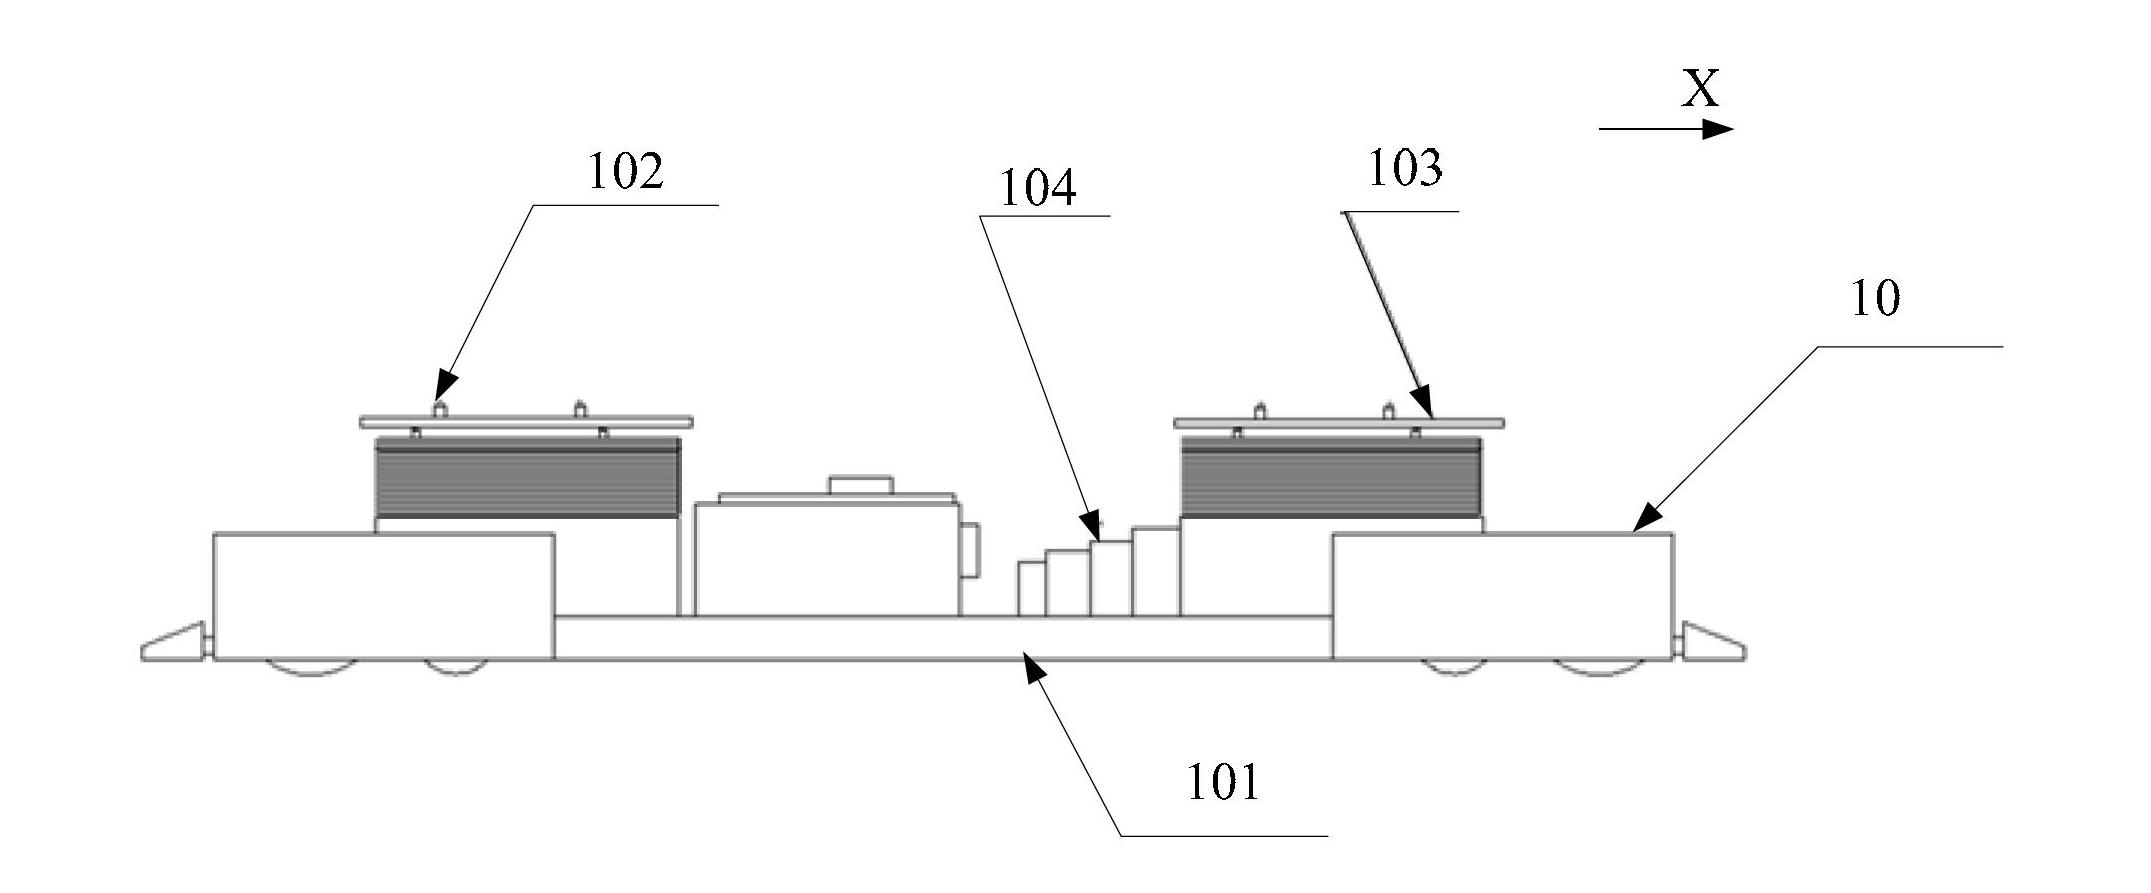 AGV (automated guided vehicle) and method for regulating distance